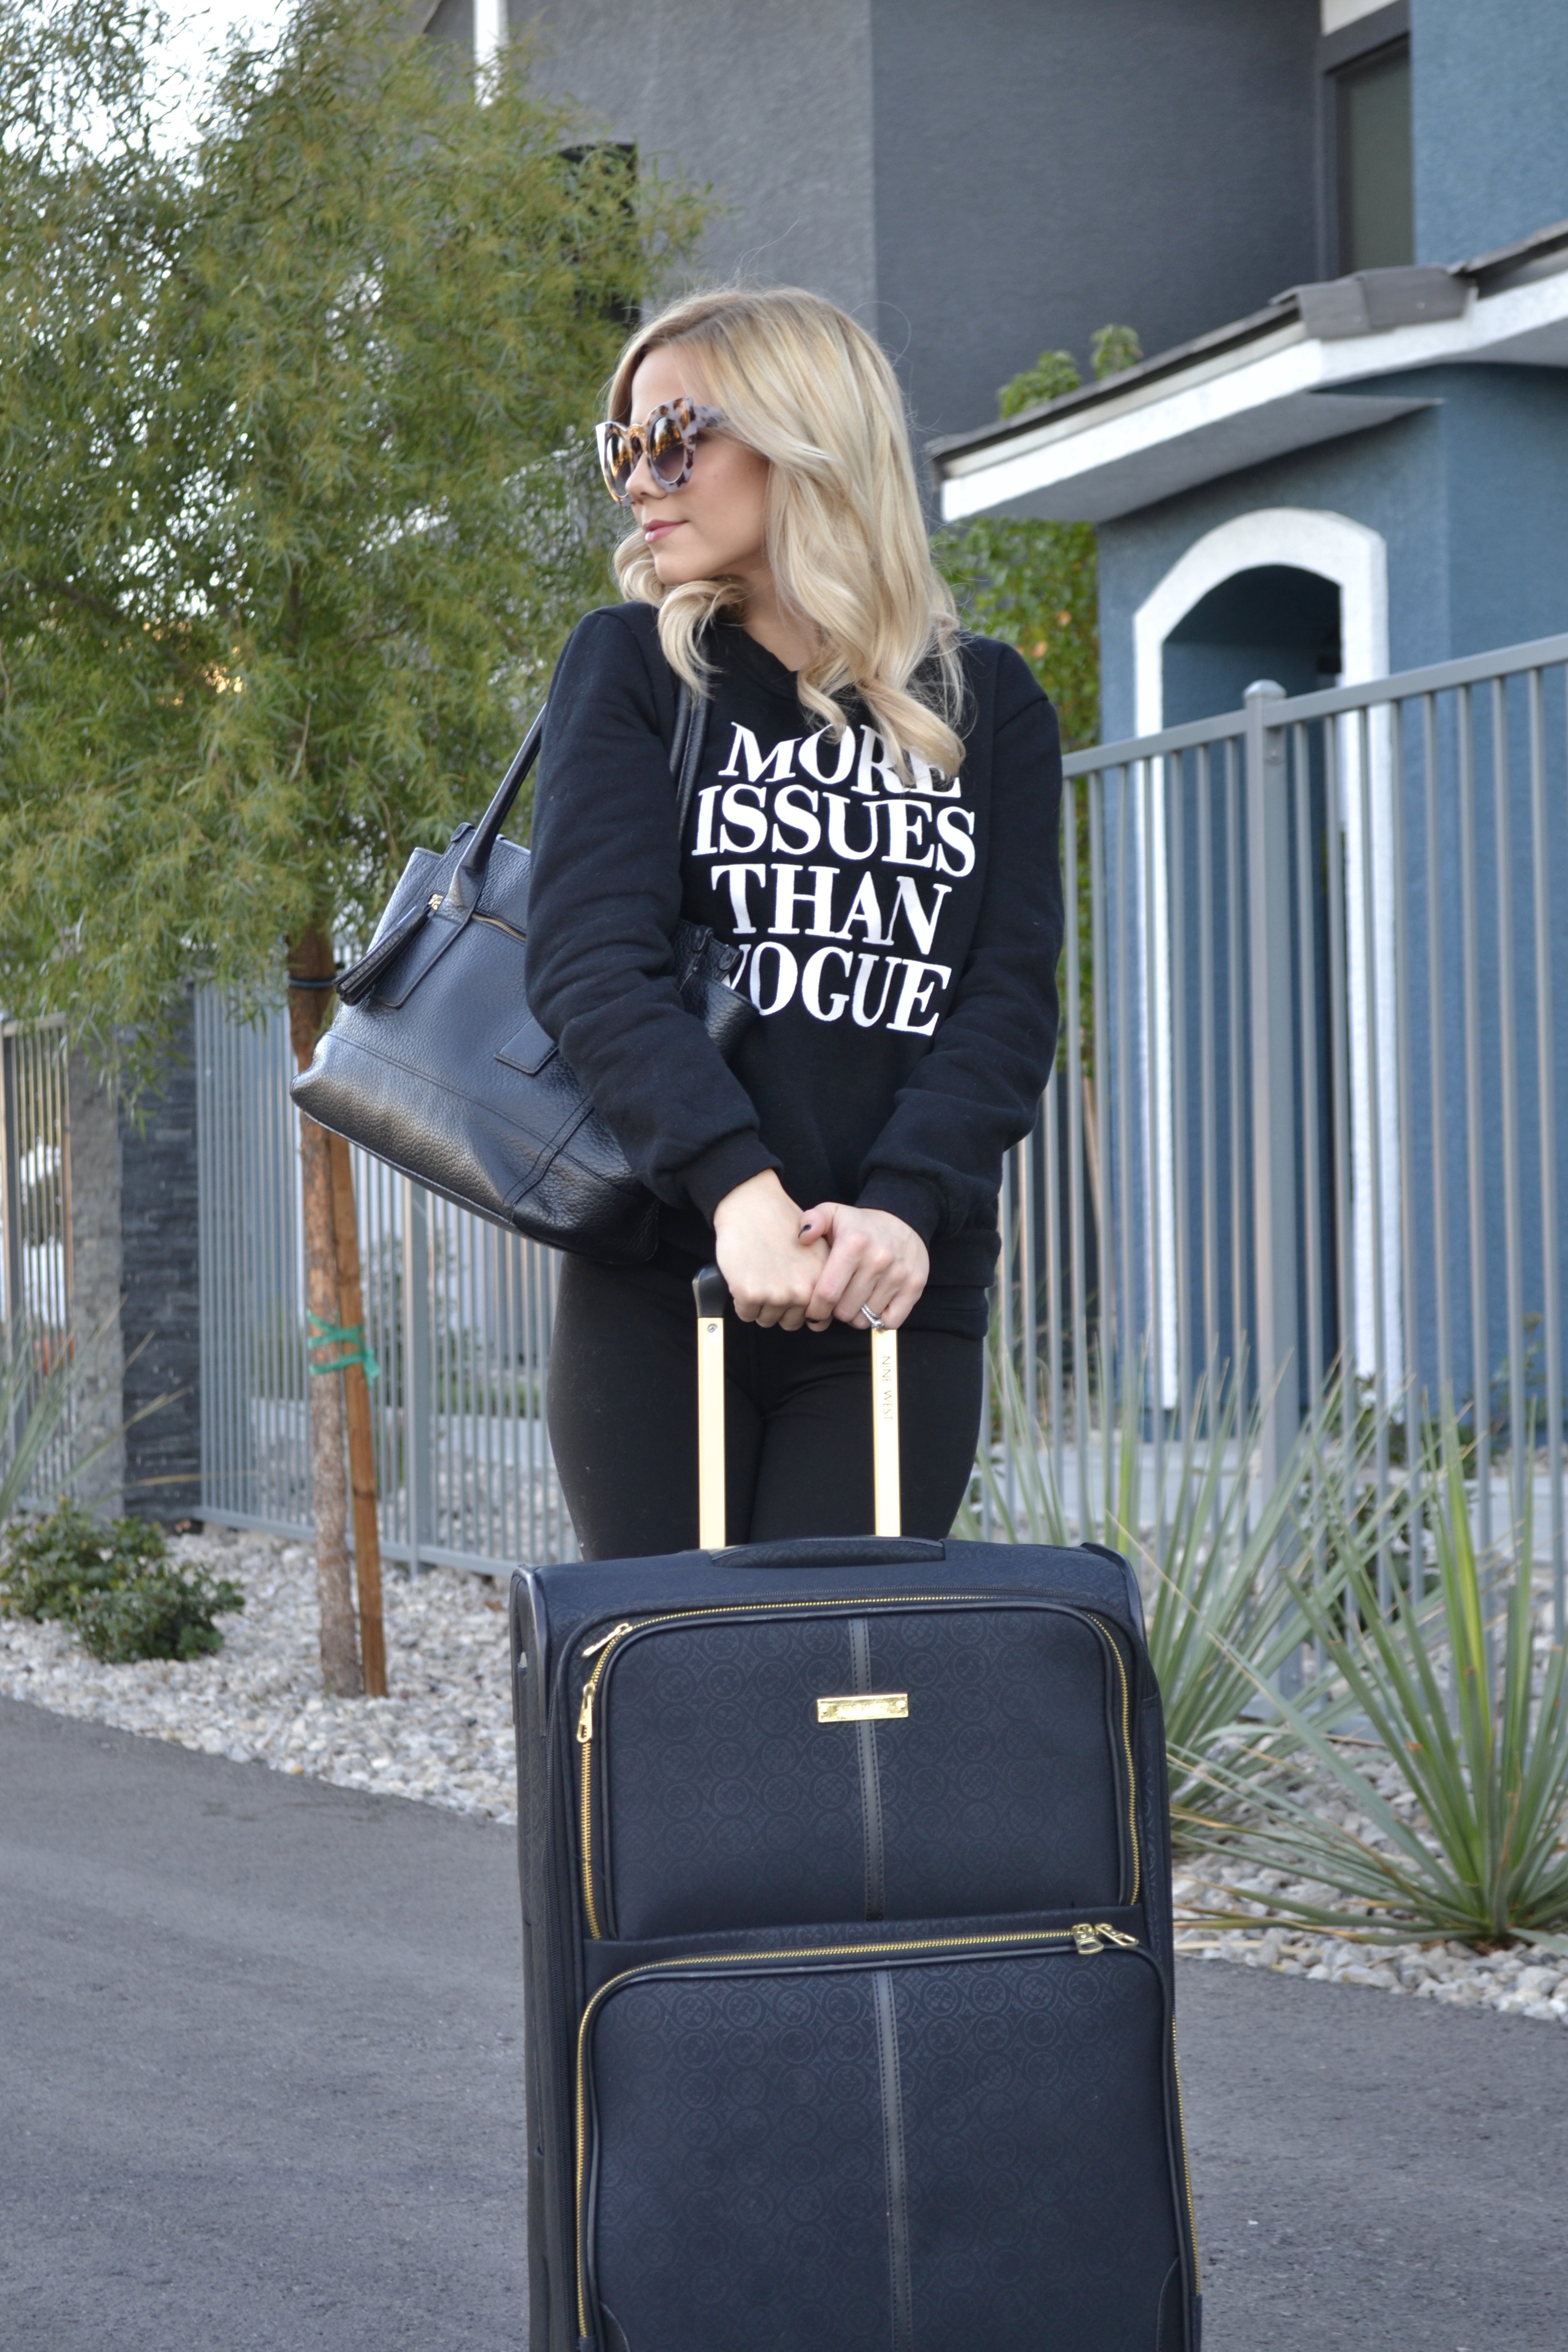 More Issues Than Vogue Sweatshirt |8 Travel Tips|